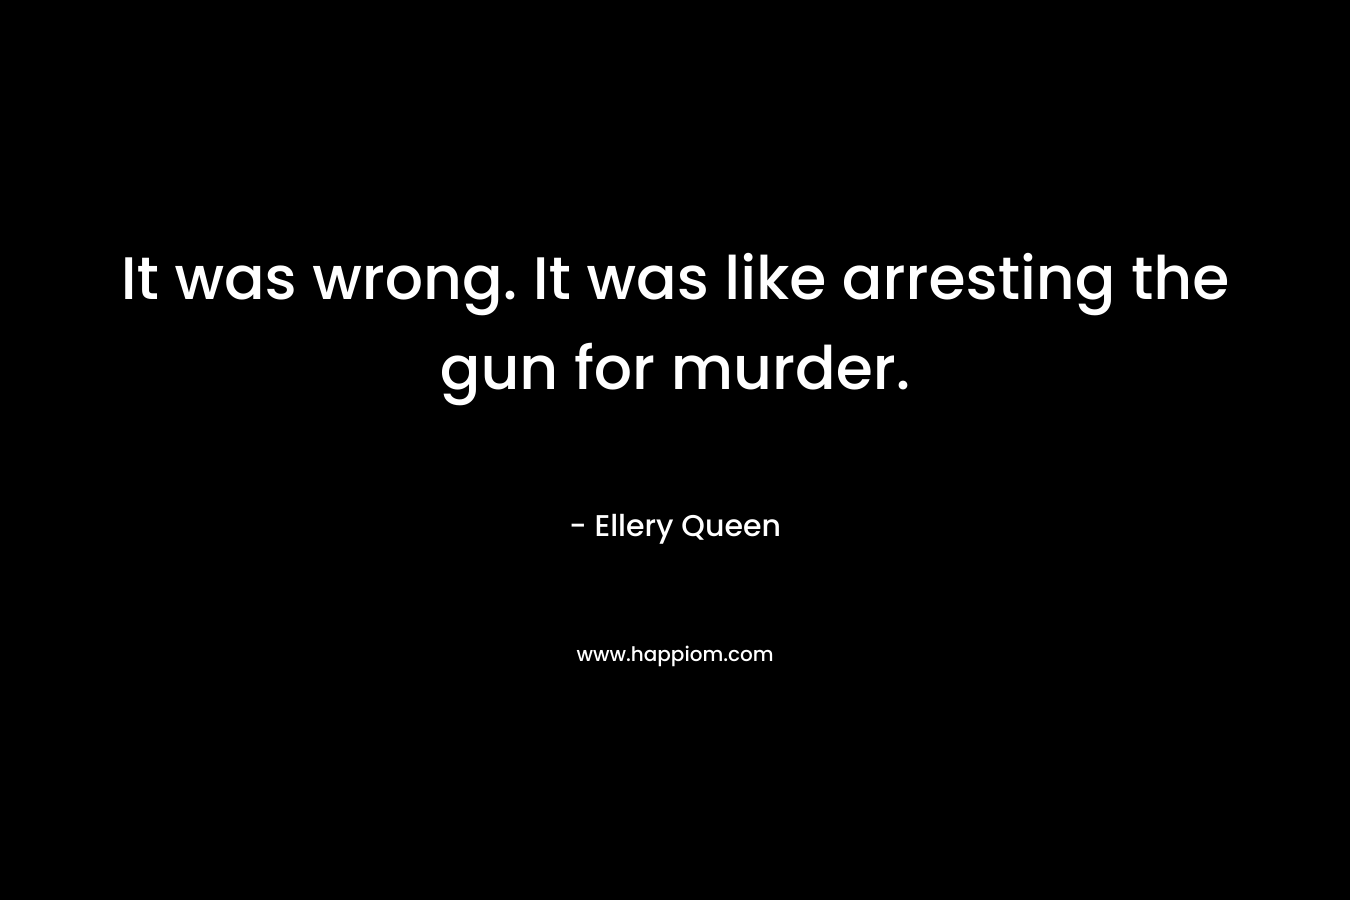 It was wrong. It was like arresting the gun for murder.